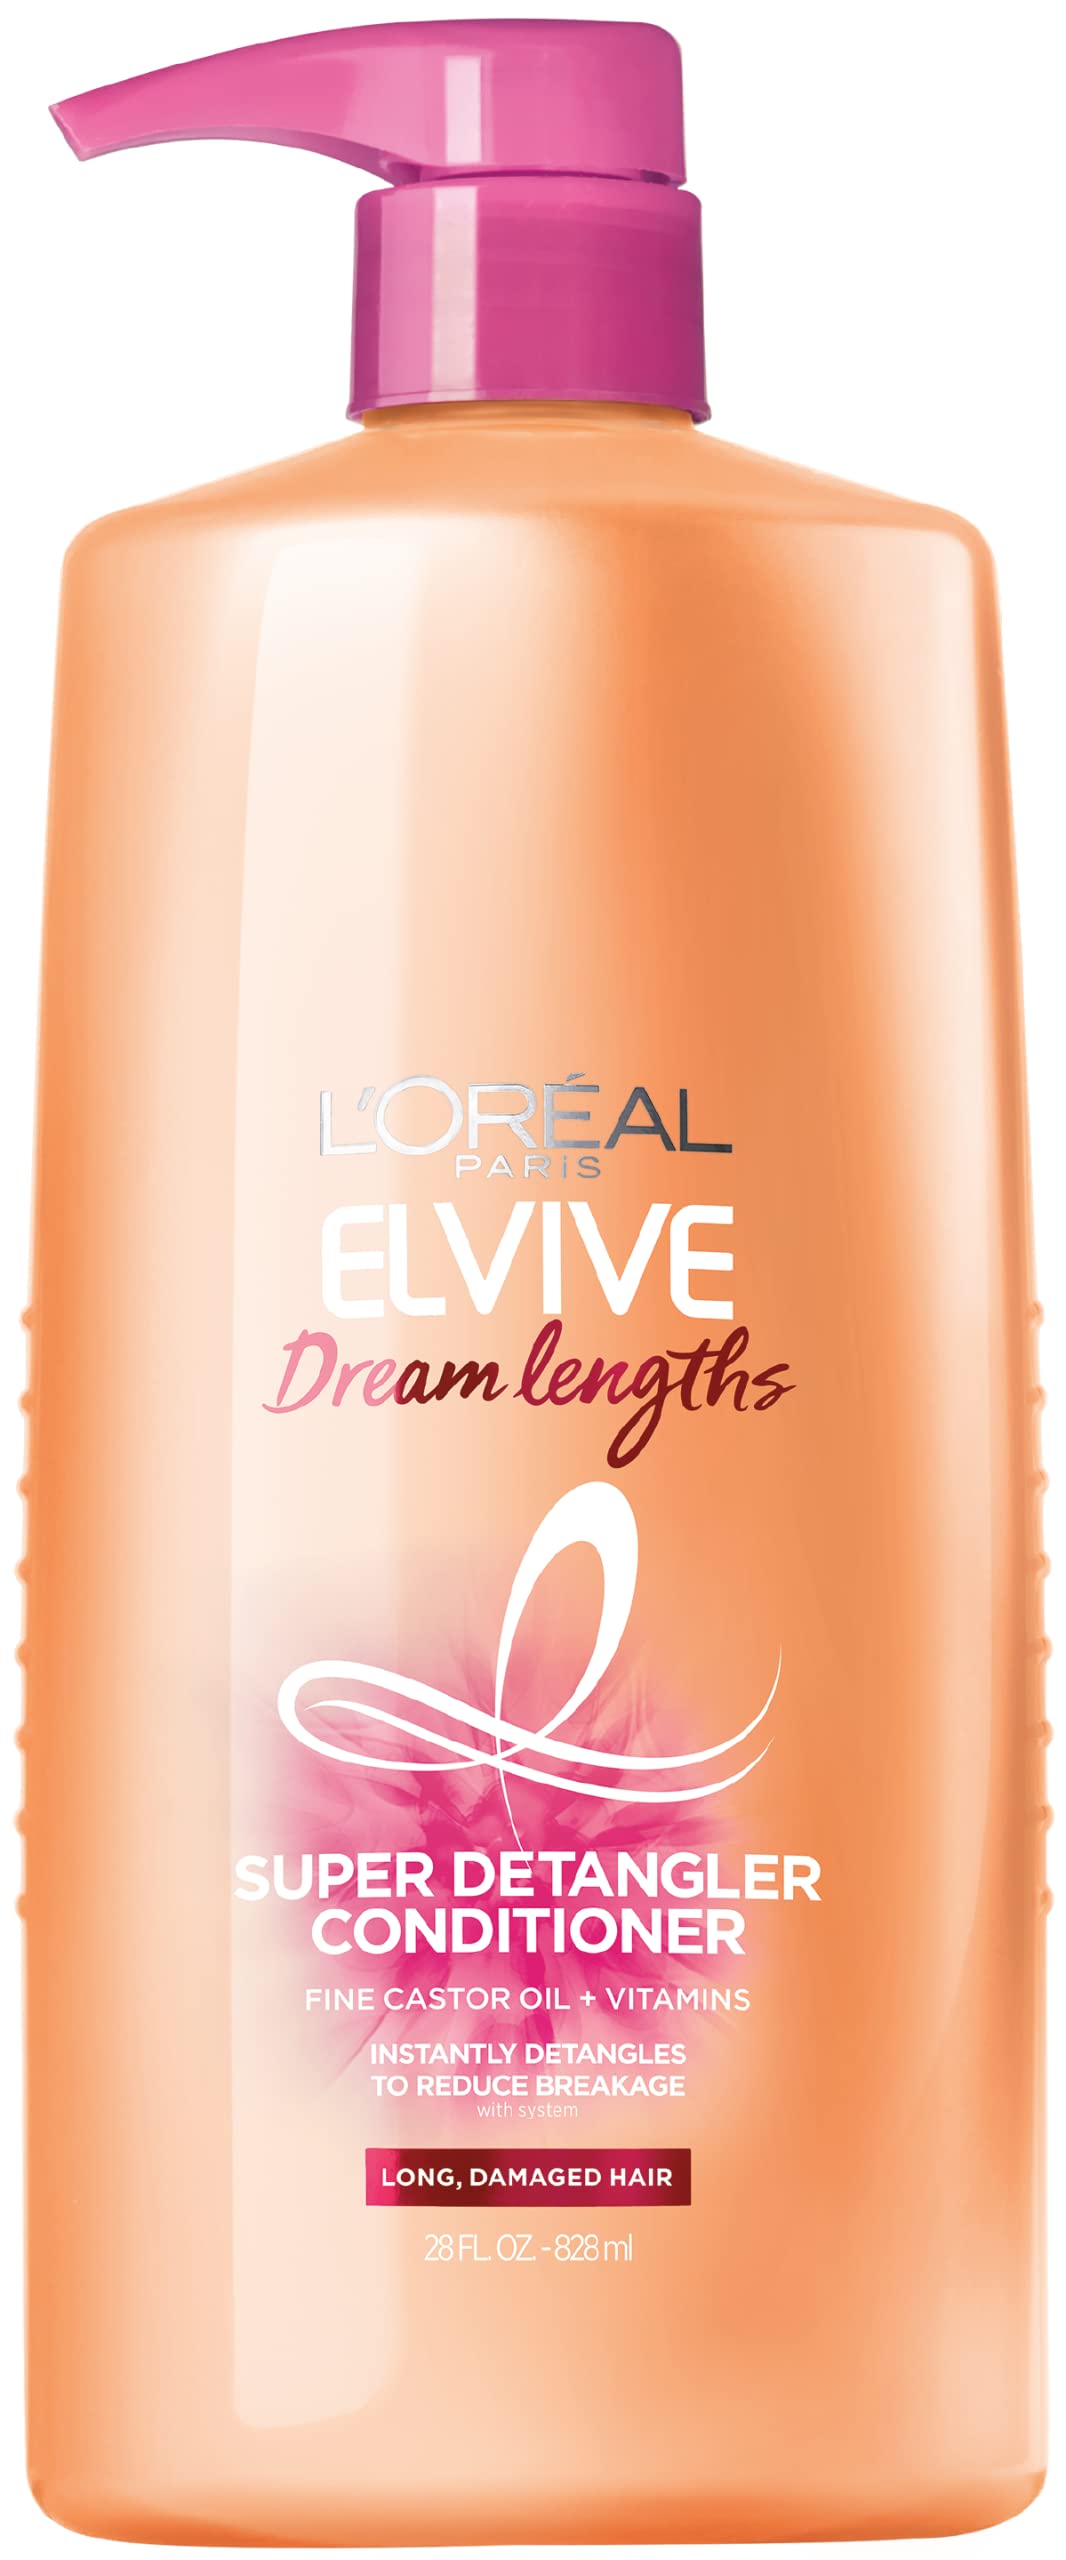 L'Oreal Paris Elvive Dream Lengths Super Detangling Conditioner With Fine Castor Oil and Vitamins B3 and B5 for Long, Damaged Hair, Instantly Detangles To Reduce Breakage With System, 28 Fl Ounce